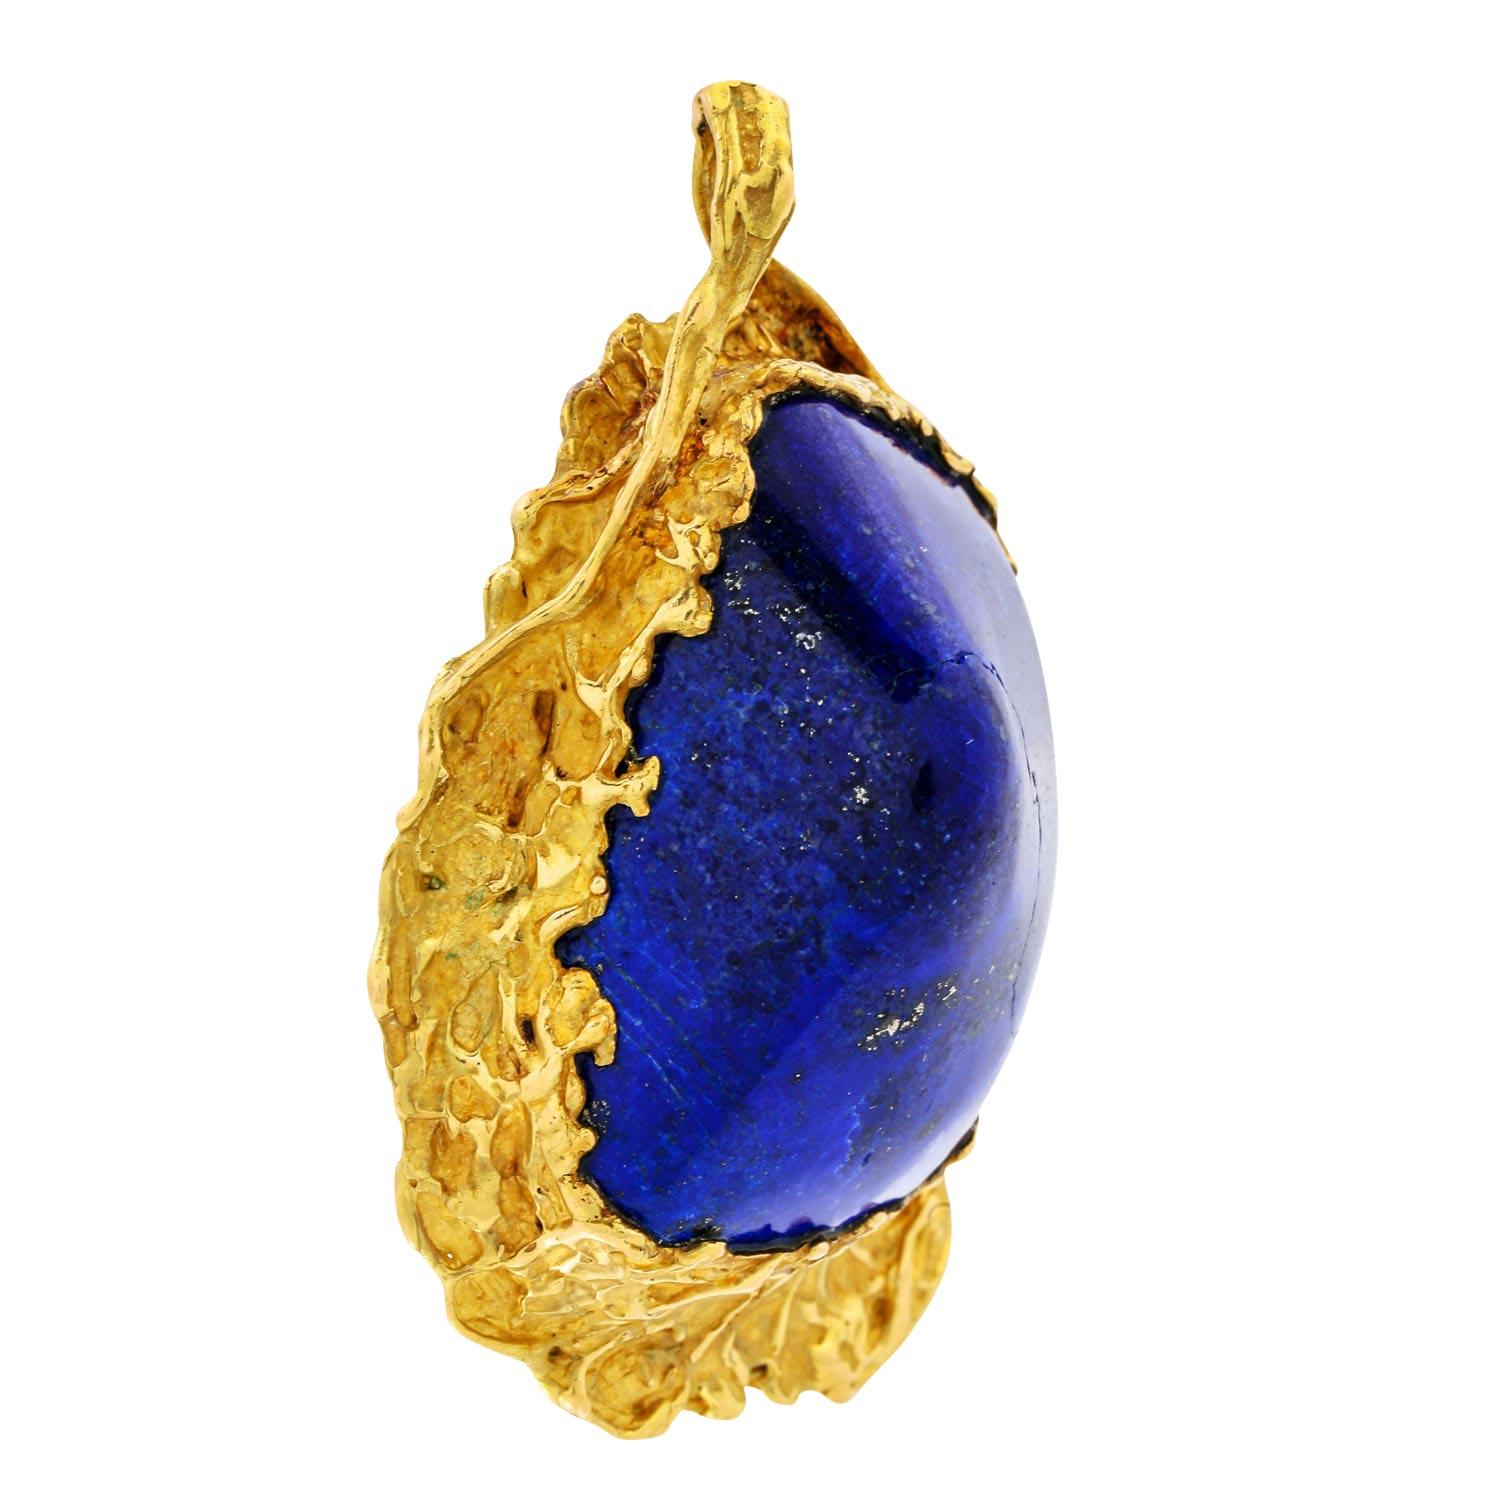 of approx. 38.5x29x21.5 mm (LBT), color treated, faceted on the back, GG 18K, total 53.1 g, length approx. 6 cm, 20./21. Century, slight signs of wear, unique jewellery!

 Pendant with large lapis lazui of approx. 38.5x29x21.5 mm (LWD), color